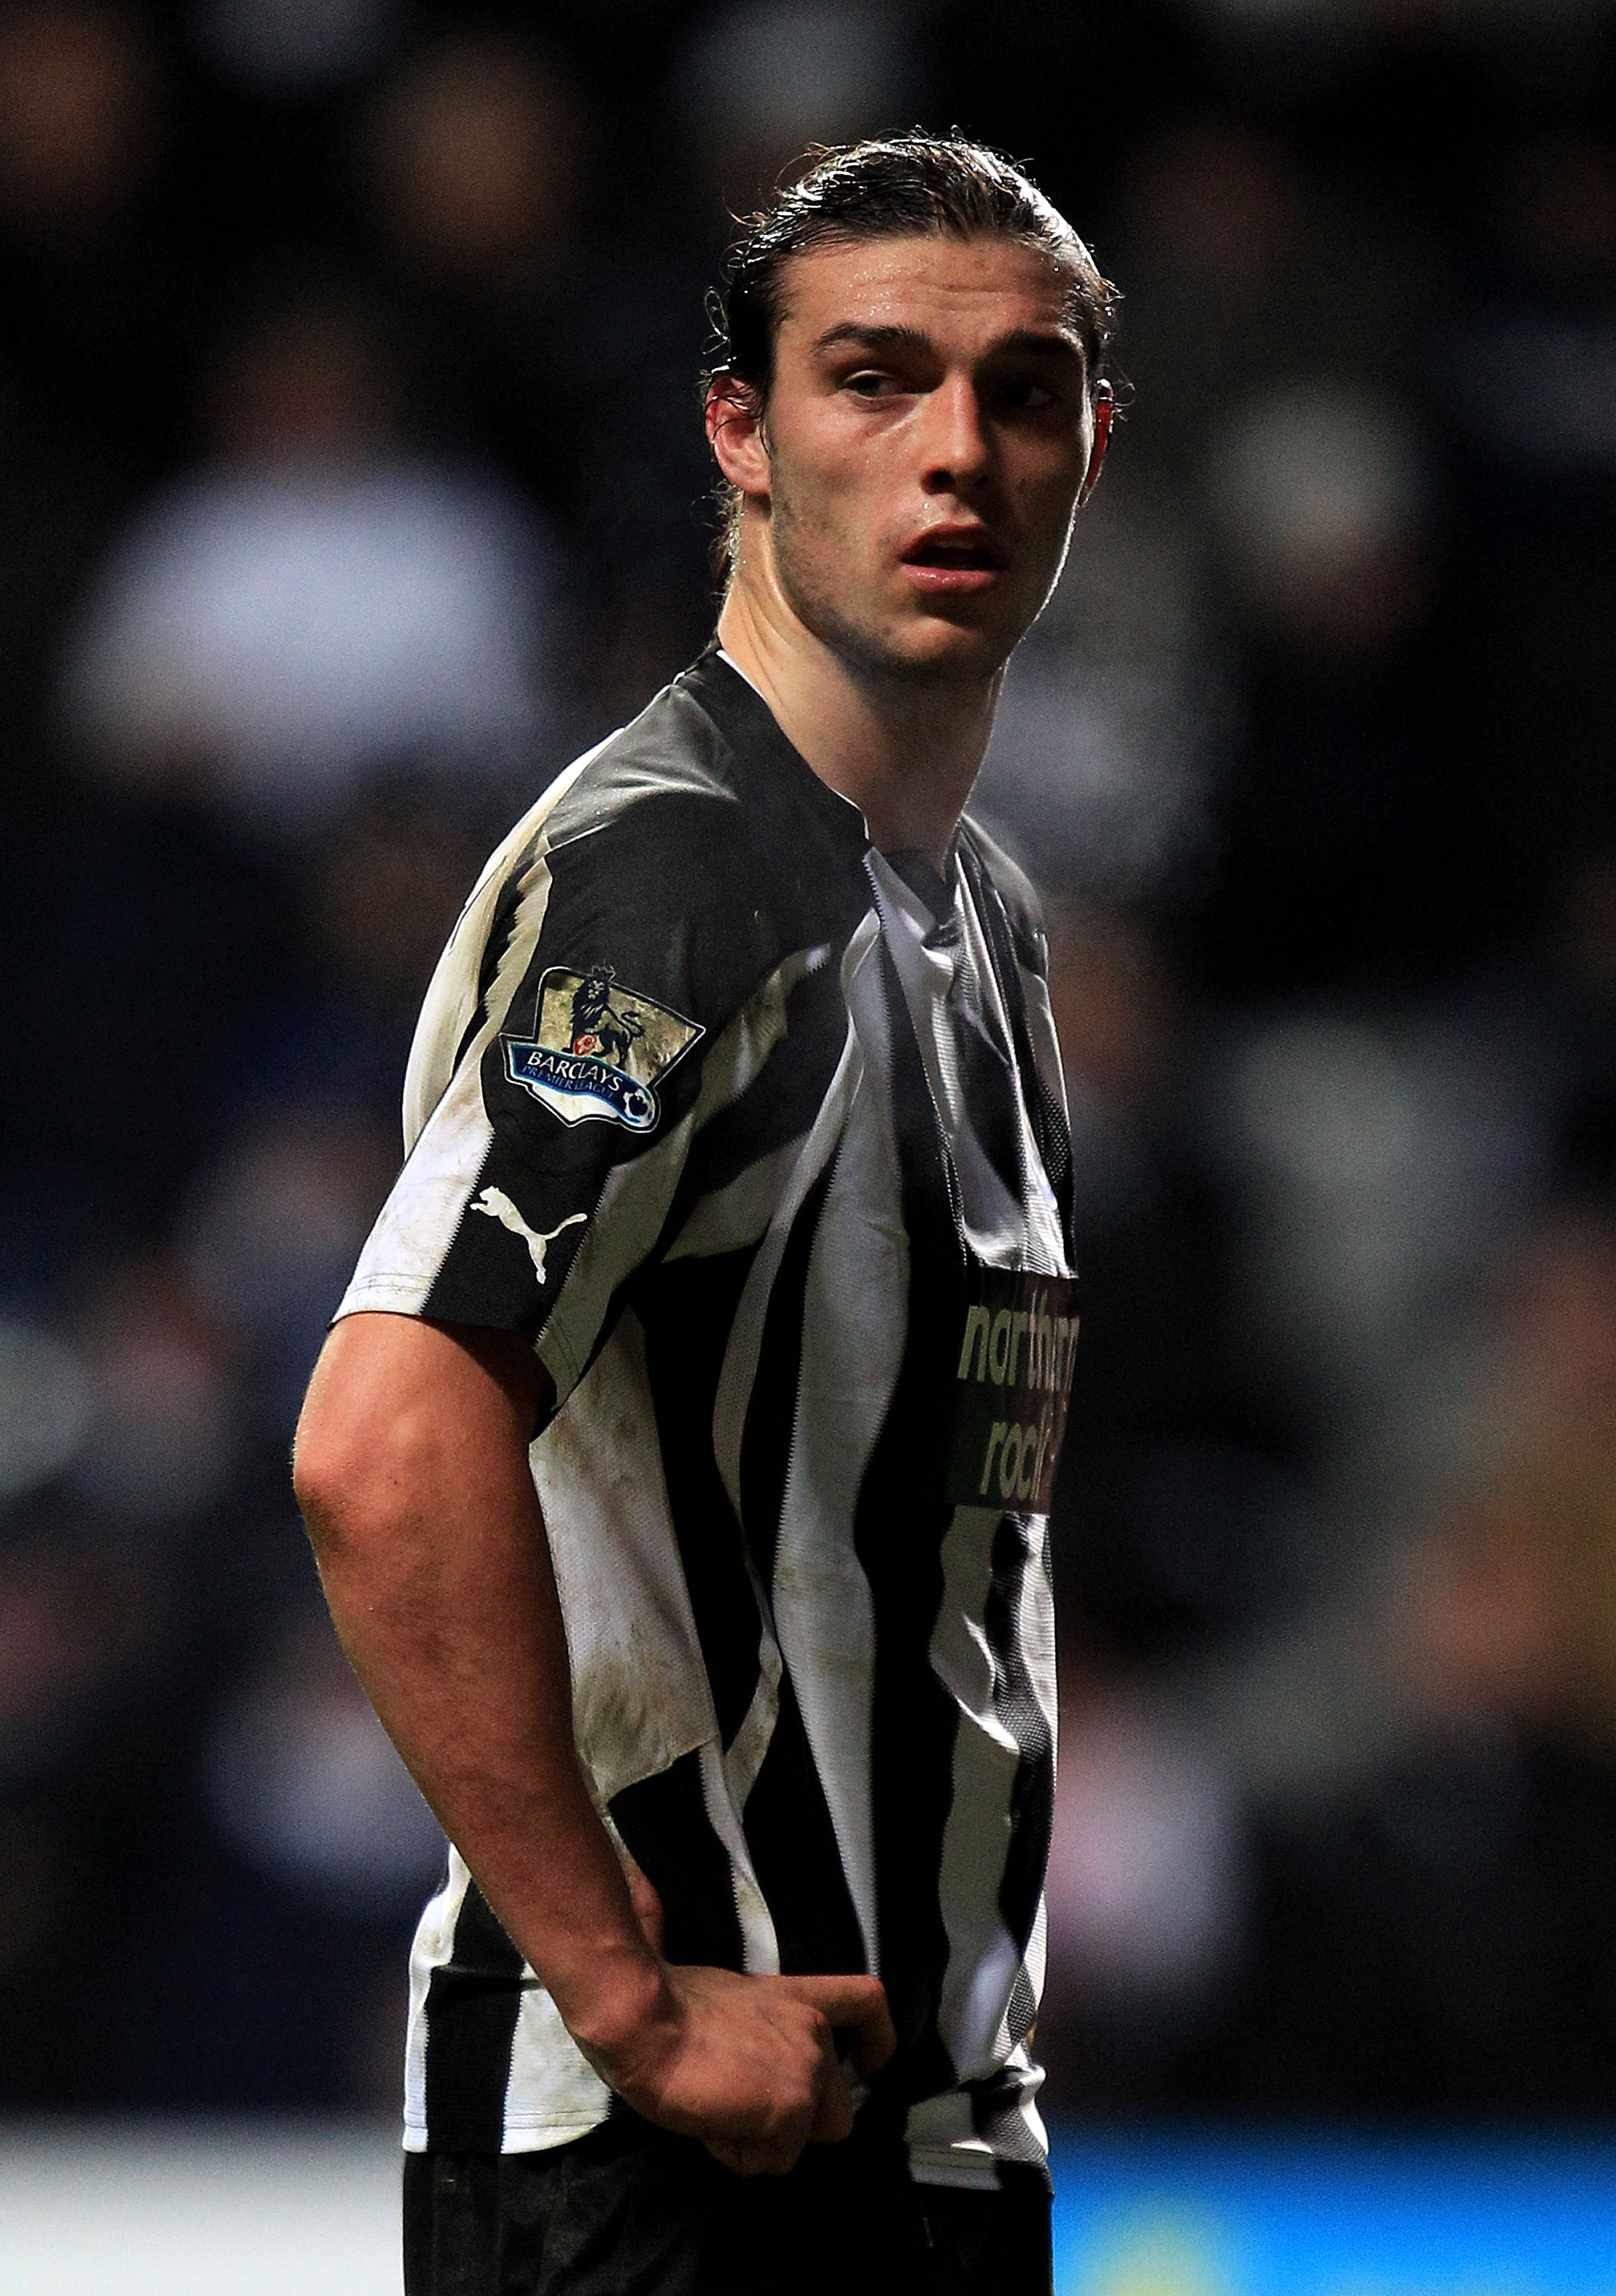 NEWCASTLE, UNITED KINGDOM - DECEMBER 11:  Andy Carroll of Newcastle United looks on during the Barclays Premier League match between Newcastle United and Liverpool at St James' Park on December 11, 2010 in Newcastle, England. (Photo by Mark Thompson/Getty